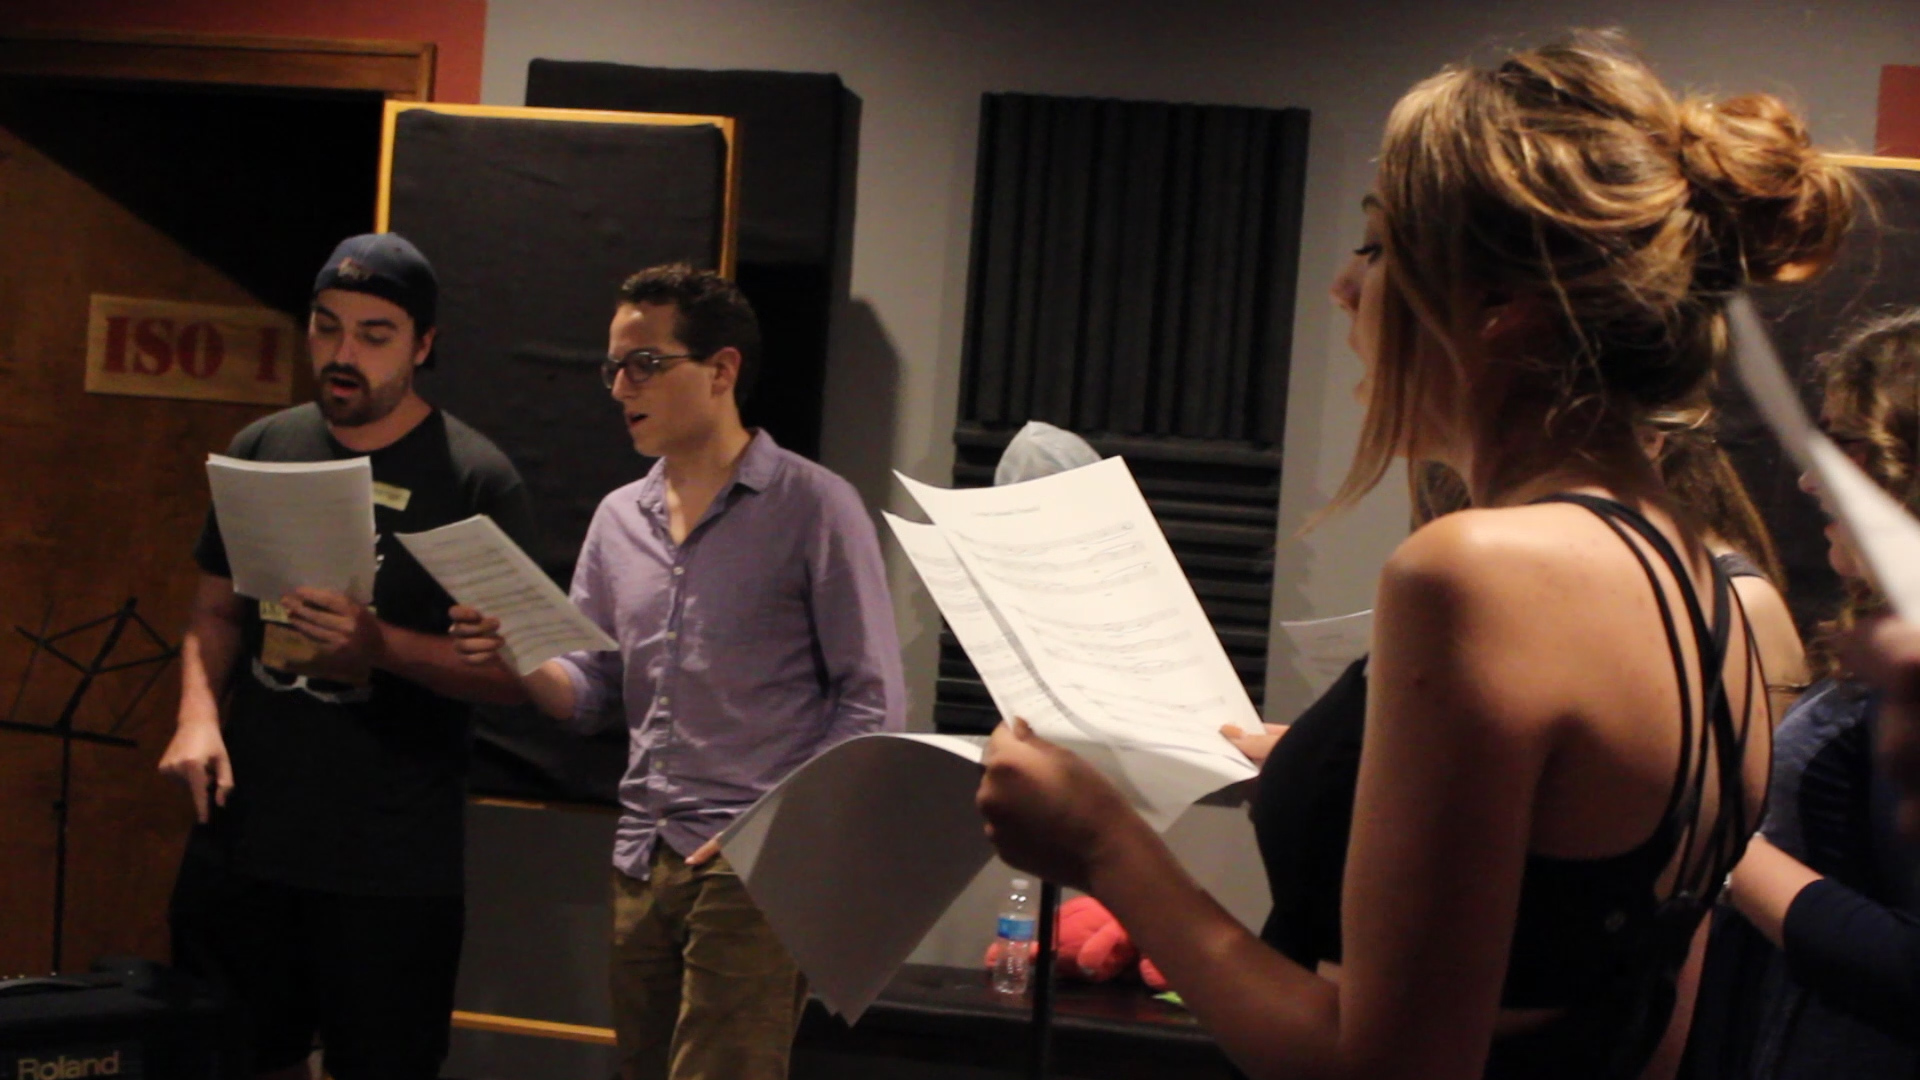 students singing in the recording studio